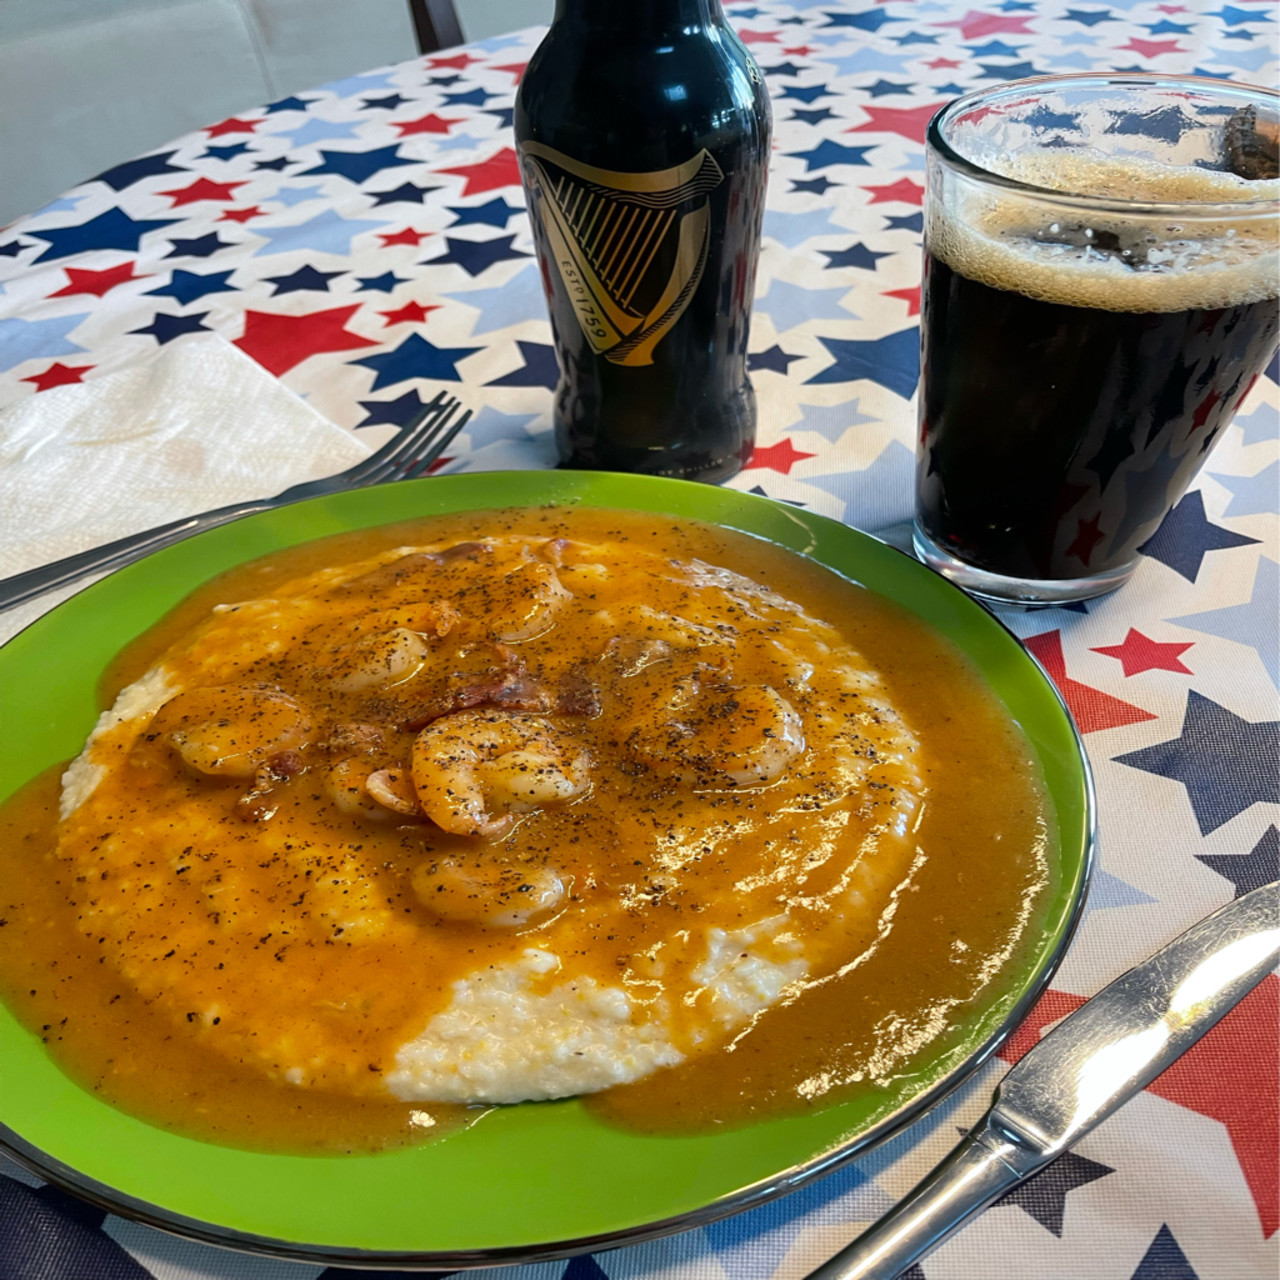 Shrimp And Creamy Grits From Cooks Country With Modifications Fc6669c4005dea7ba3f1bf9c 